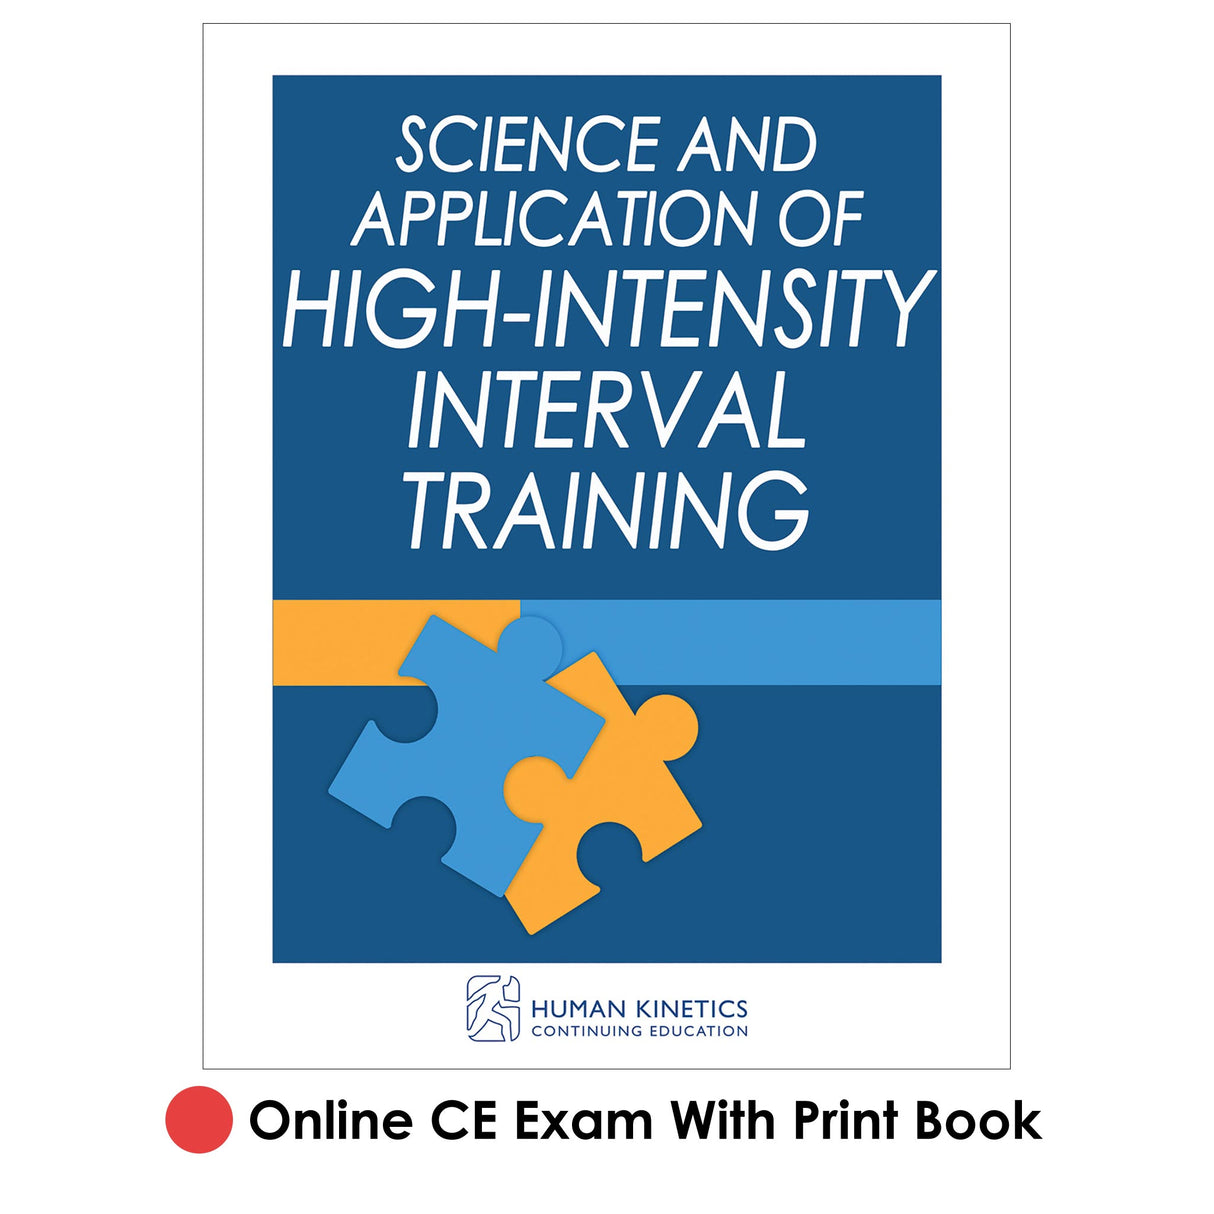 Science and Application of High-Intensity Interval Training Online CE Exam With Print Book